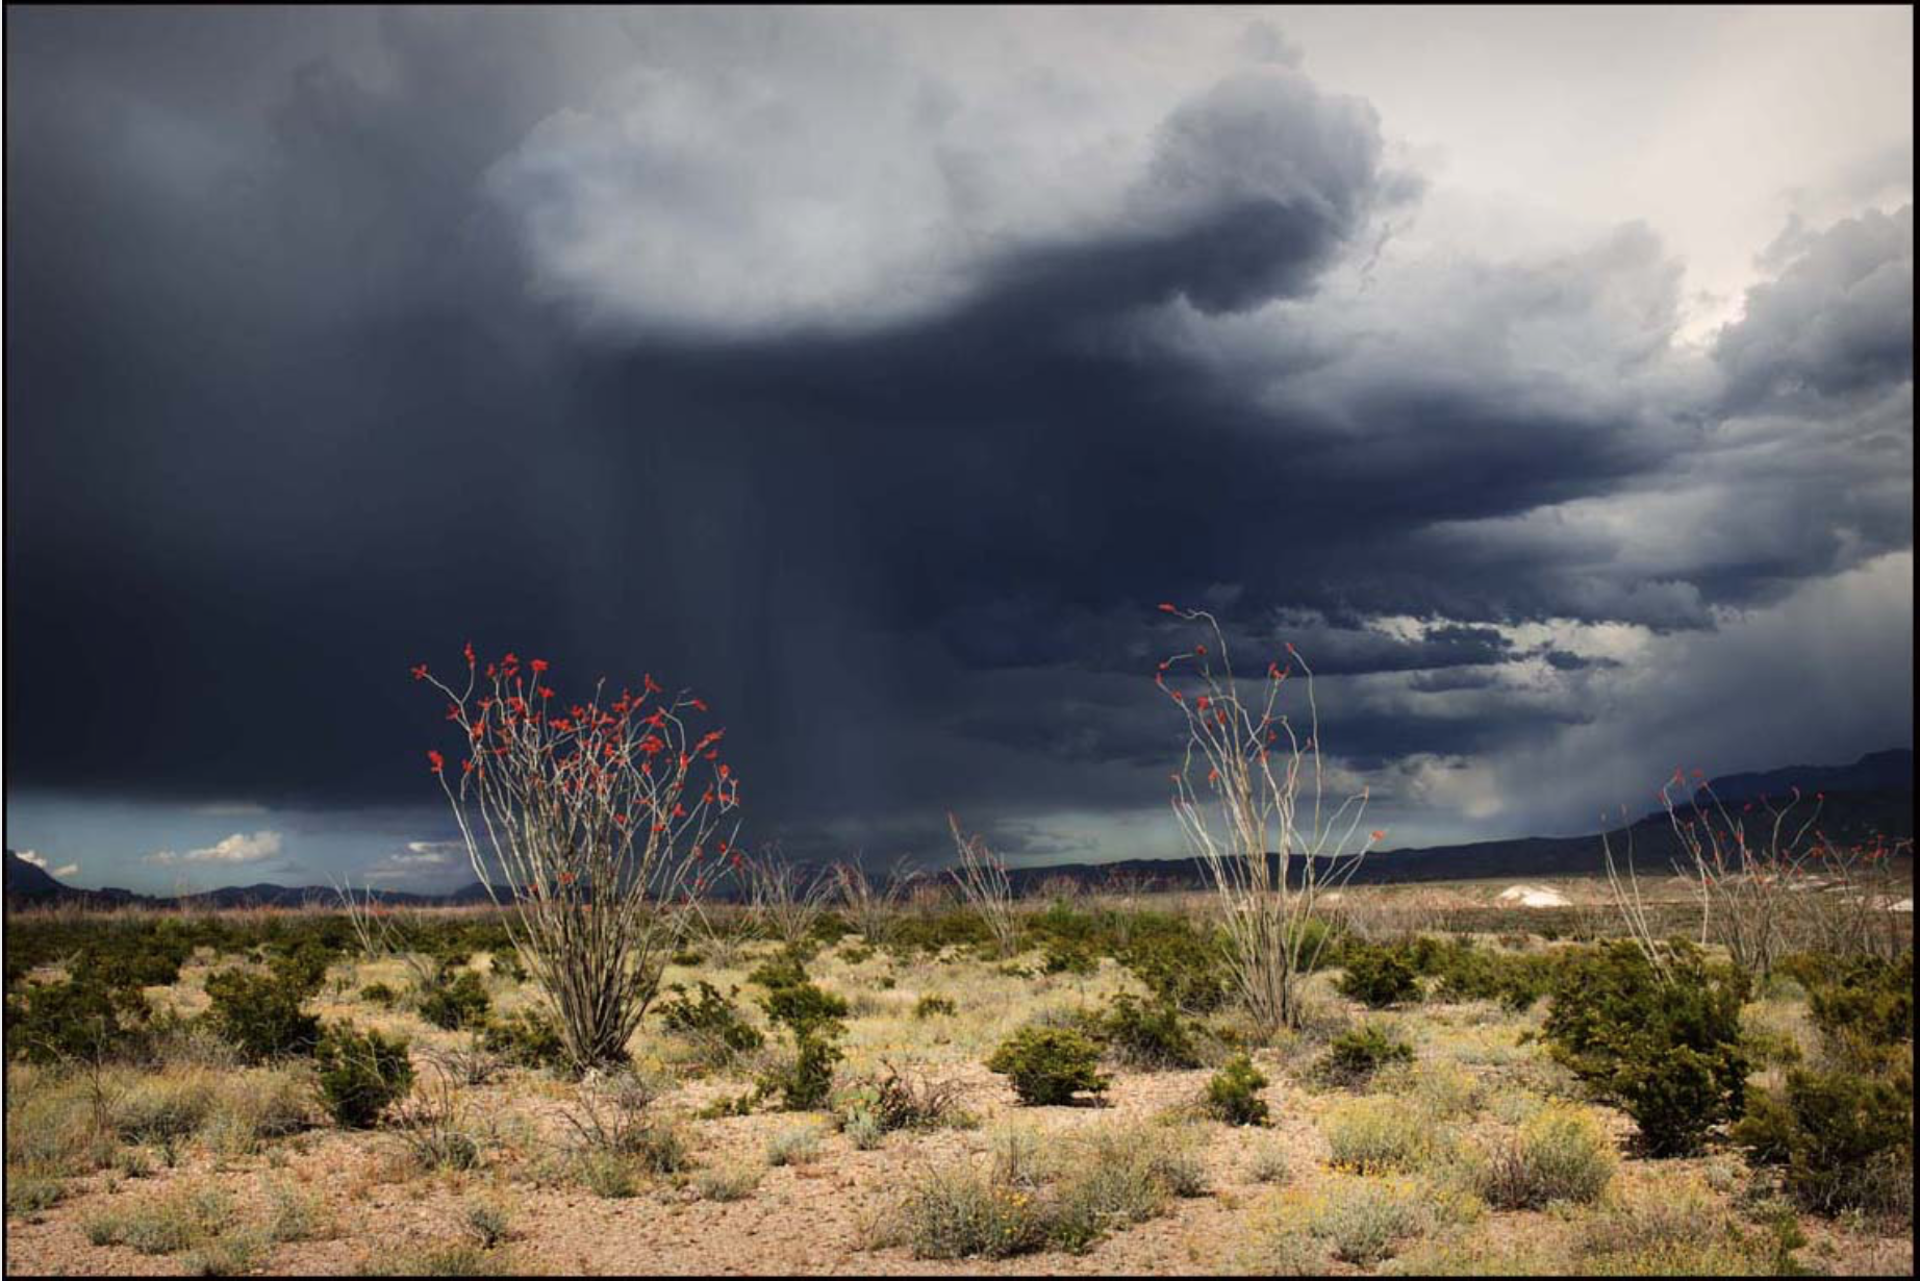 Rain with Silver Ocotillos in Bloom by James H. Evans